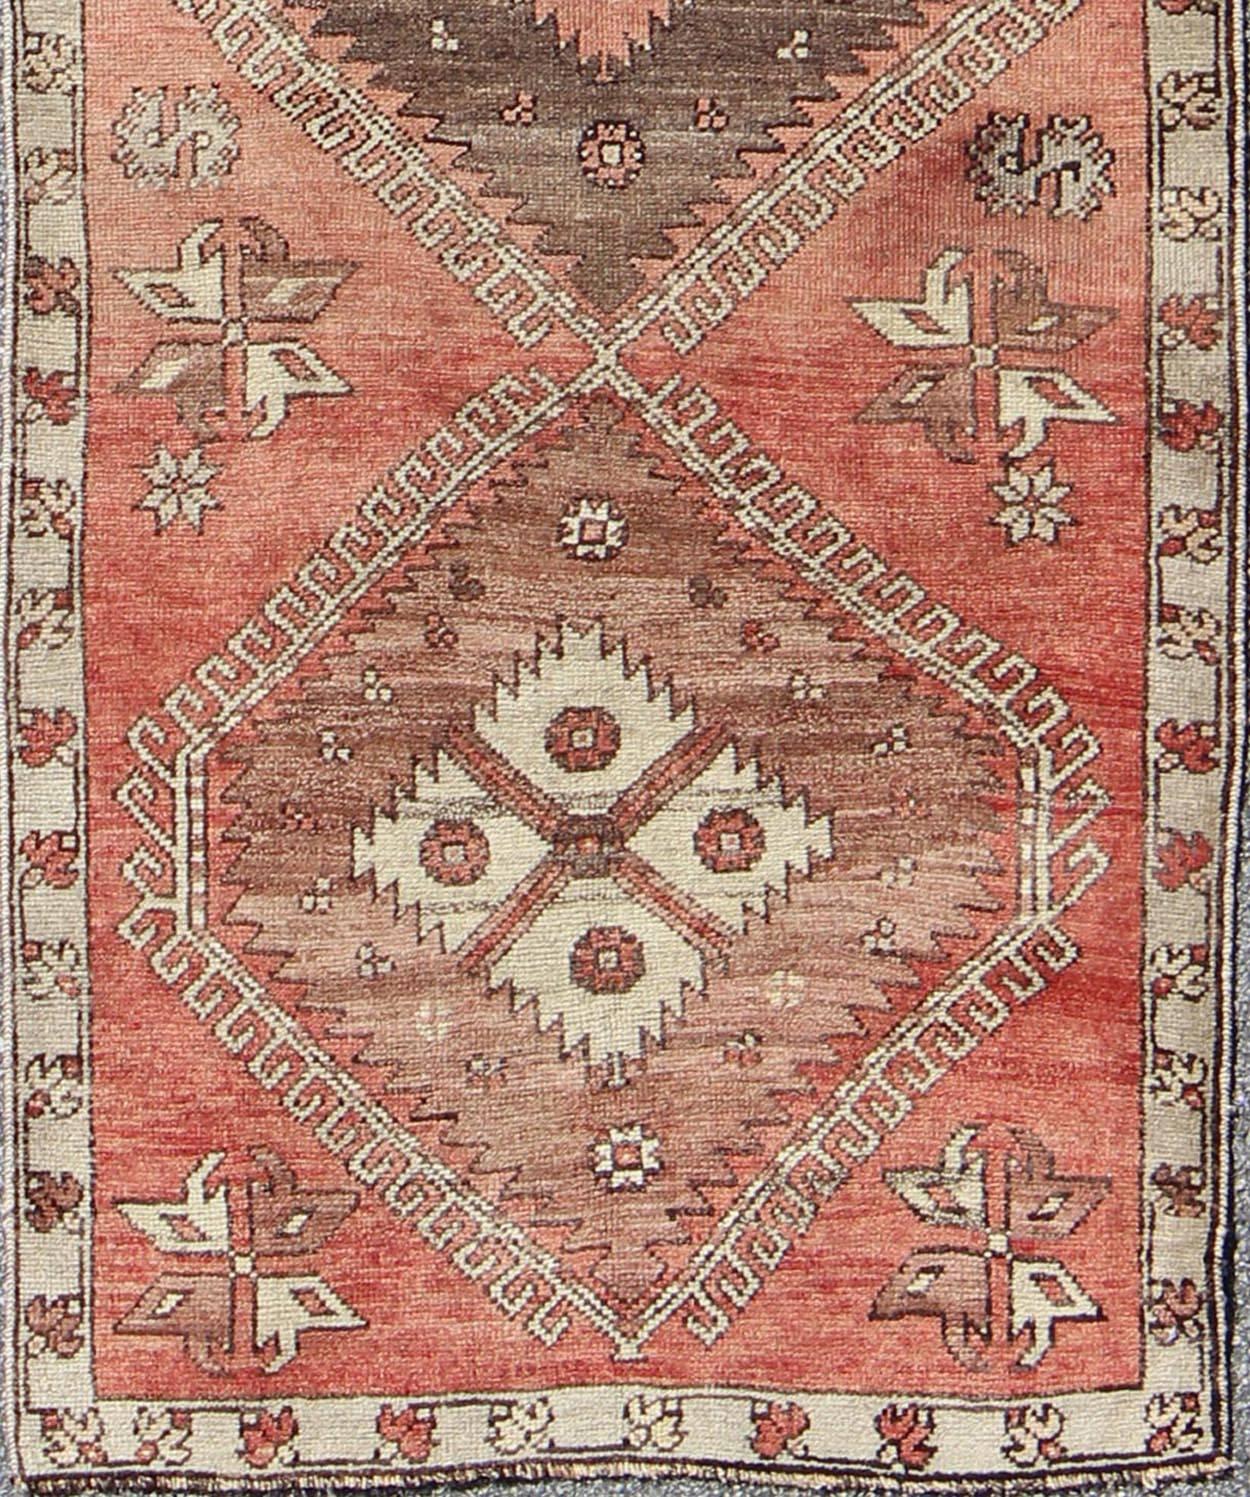 Geometric vintage Turkish Oushak runner with Medallions in red and brown, rug dur-502, country of origin / type: Turkey / Oushak, circa mid-20th century

This vintage Turkish Oushak gallery rug (circa mid-20th century) features a unique blend of